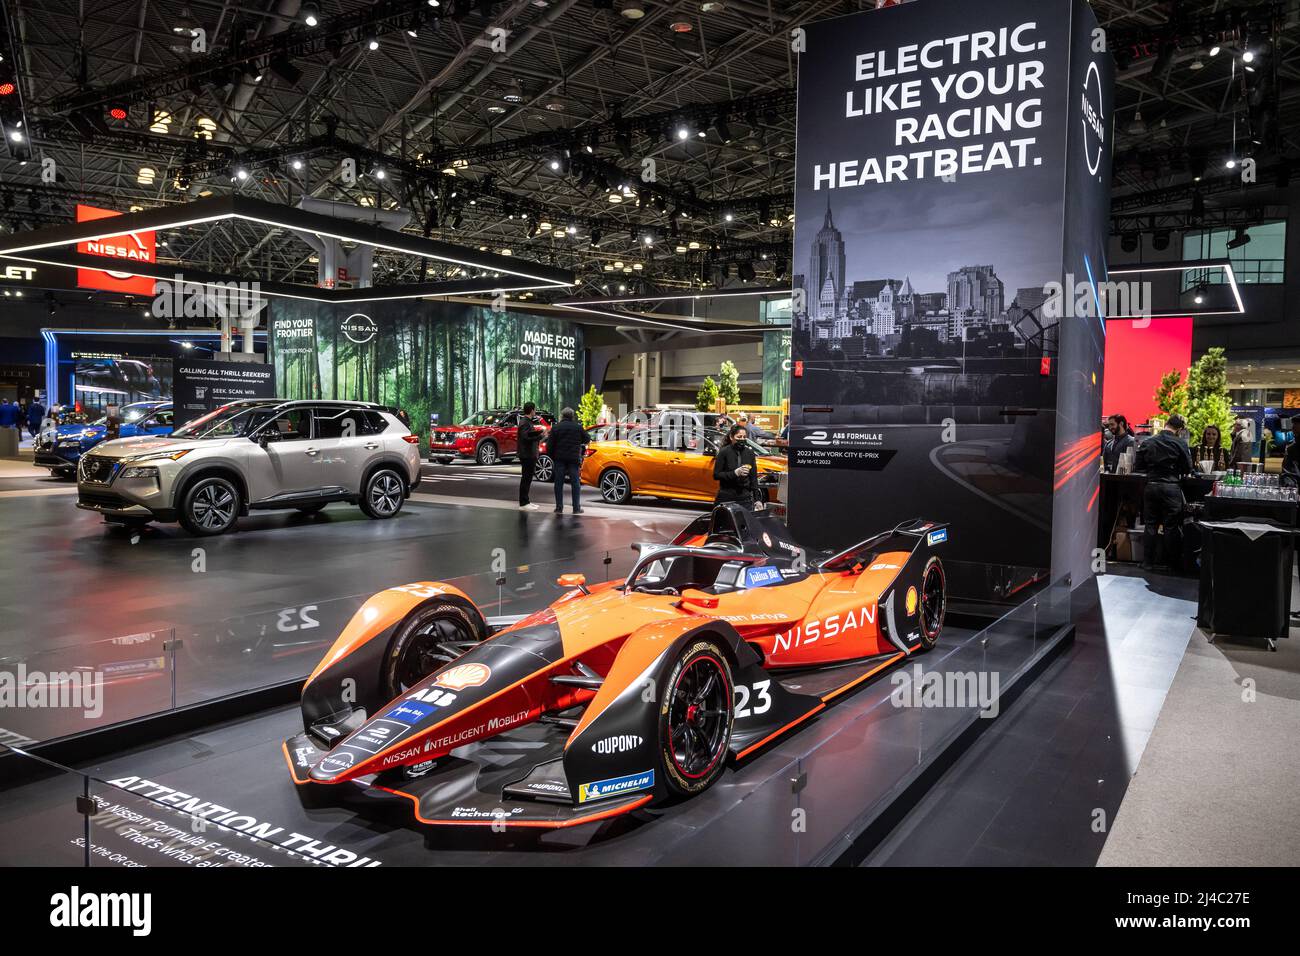 New York, USA. 13th Apr, 2022. A Nissan Formula E racing car in display at the 2022 New York International Auto Show at the Javits Center in New York City. The normally annual show opened today after it was cancelled the two previous years due to the COVID-19 pandemic. Credit: Enrique Shore/Alamy Live News Stock Photo